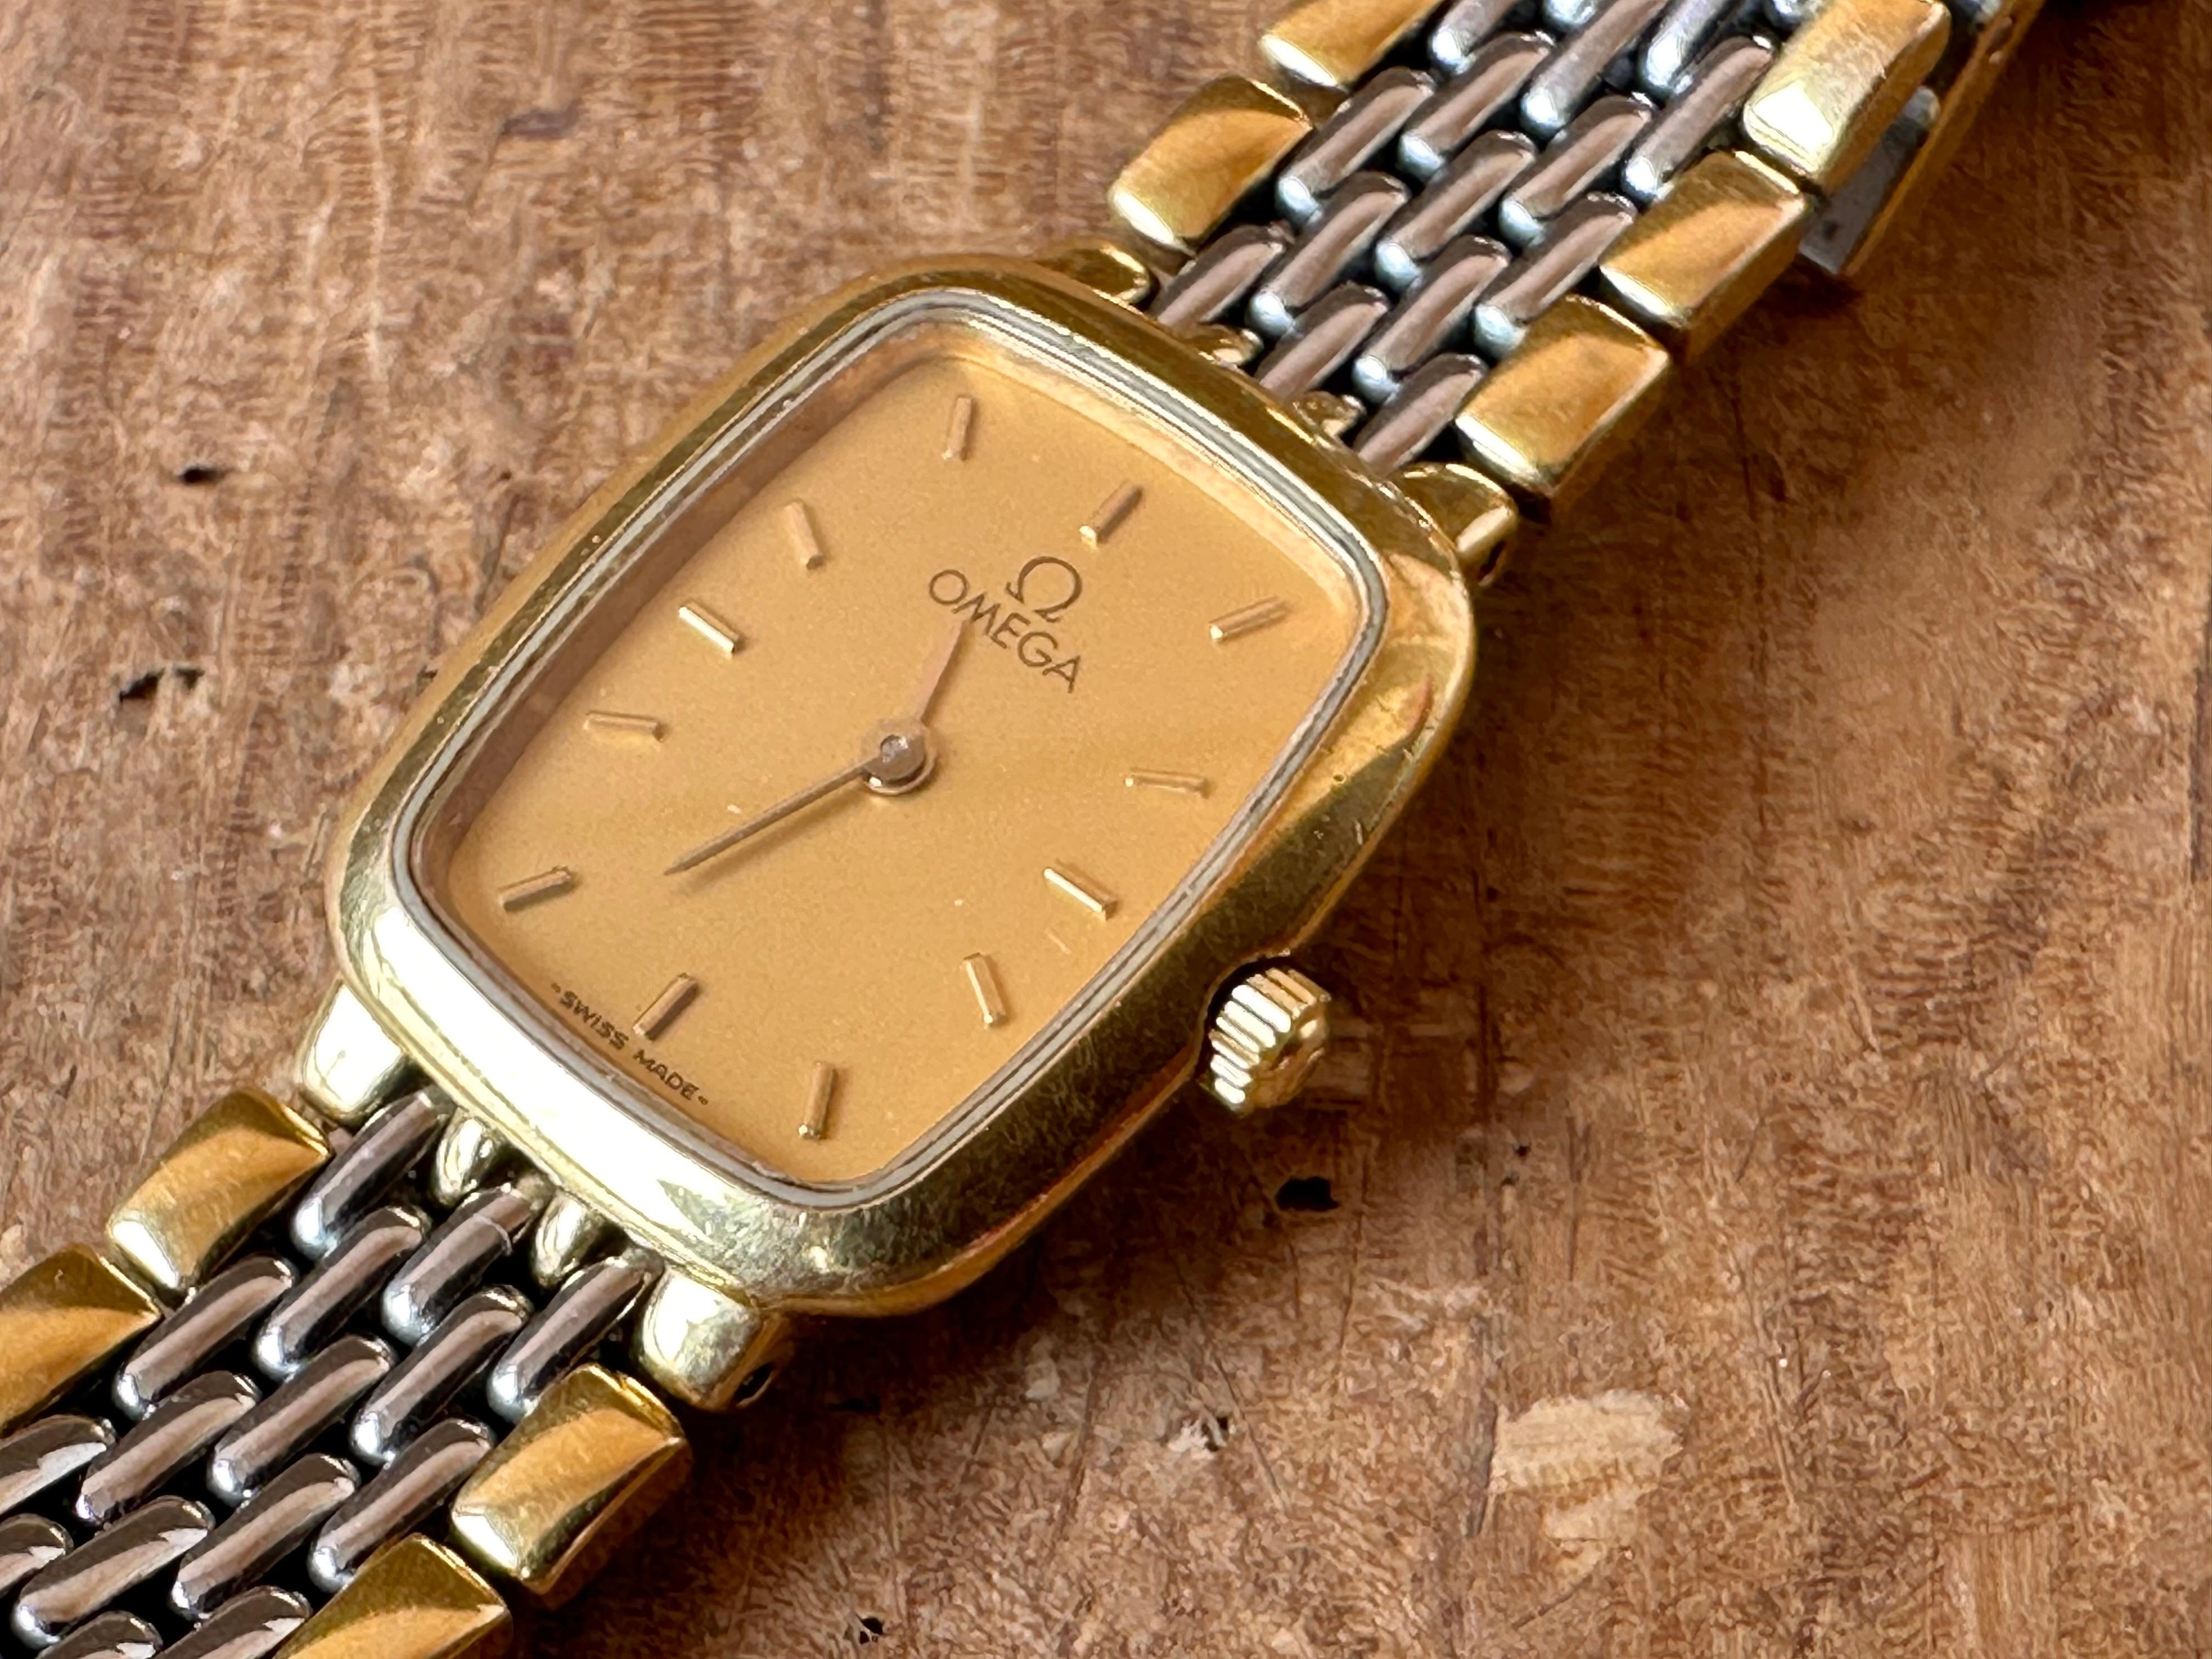 Omega Omega De Ville Golden Dial Gold Plated Ladies Watch In Good Condition For Sale In Toronto, CA